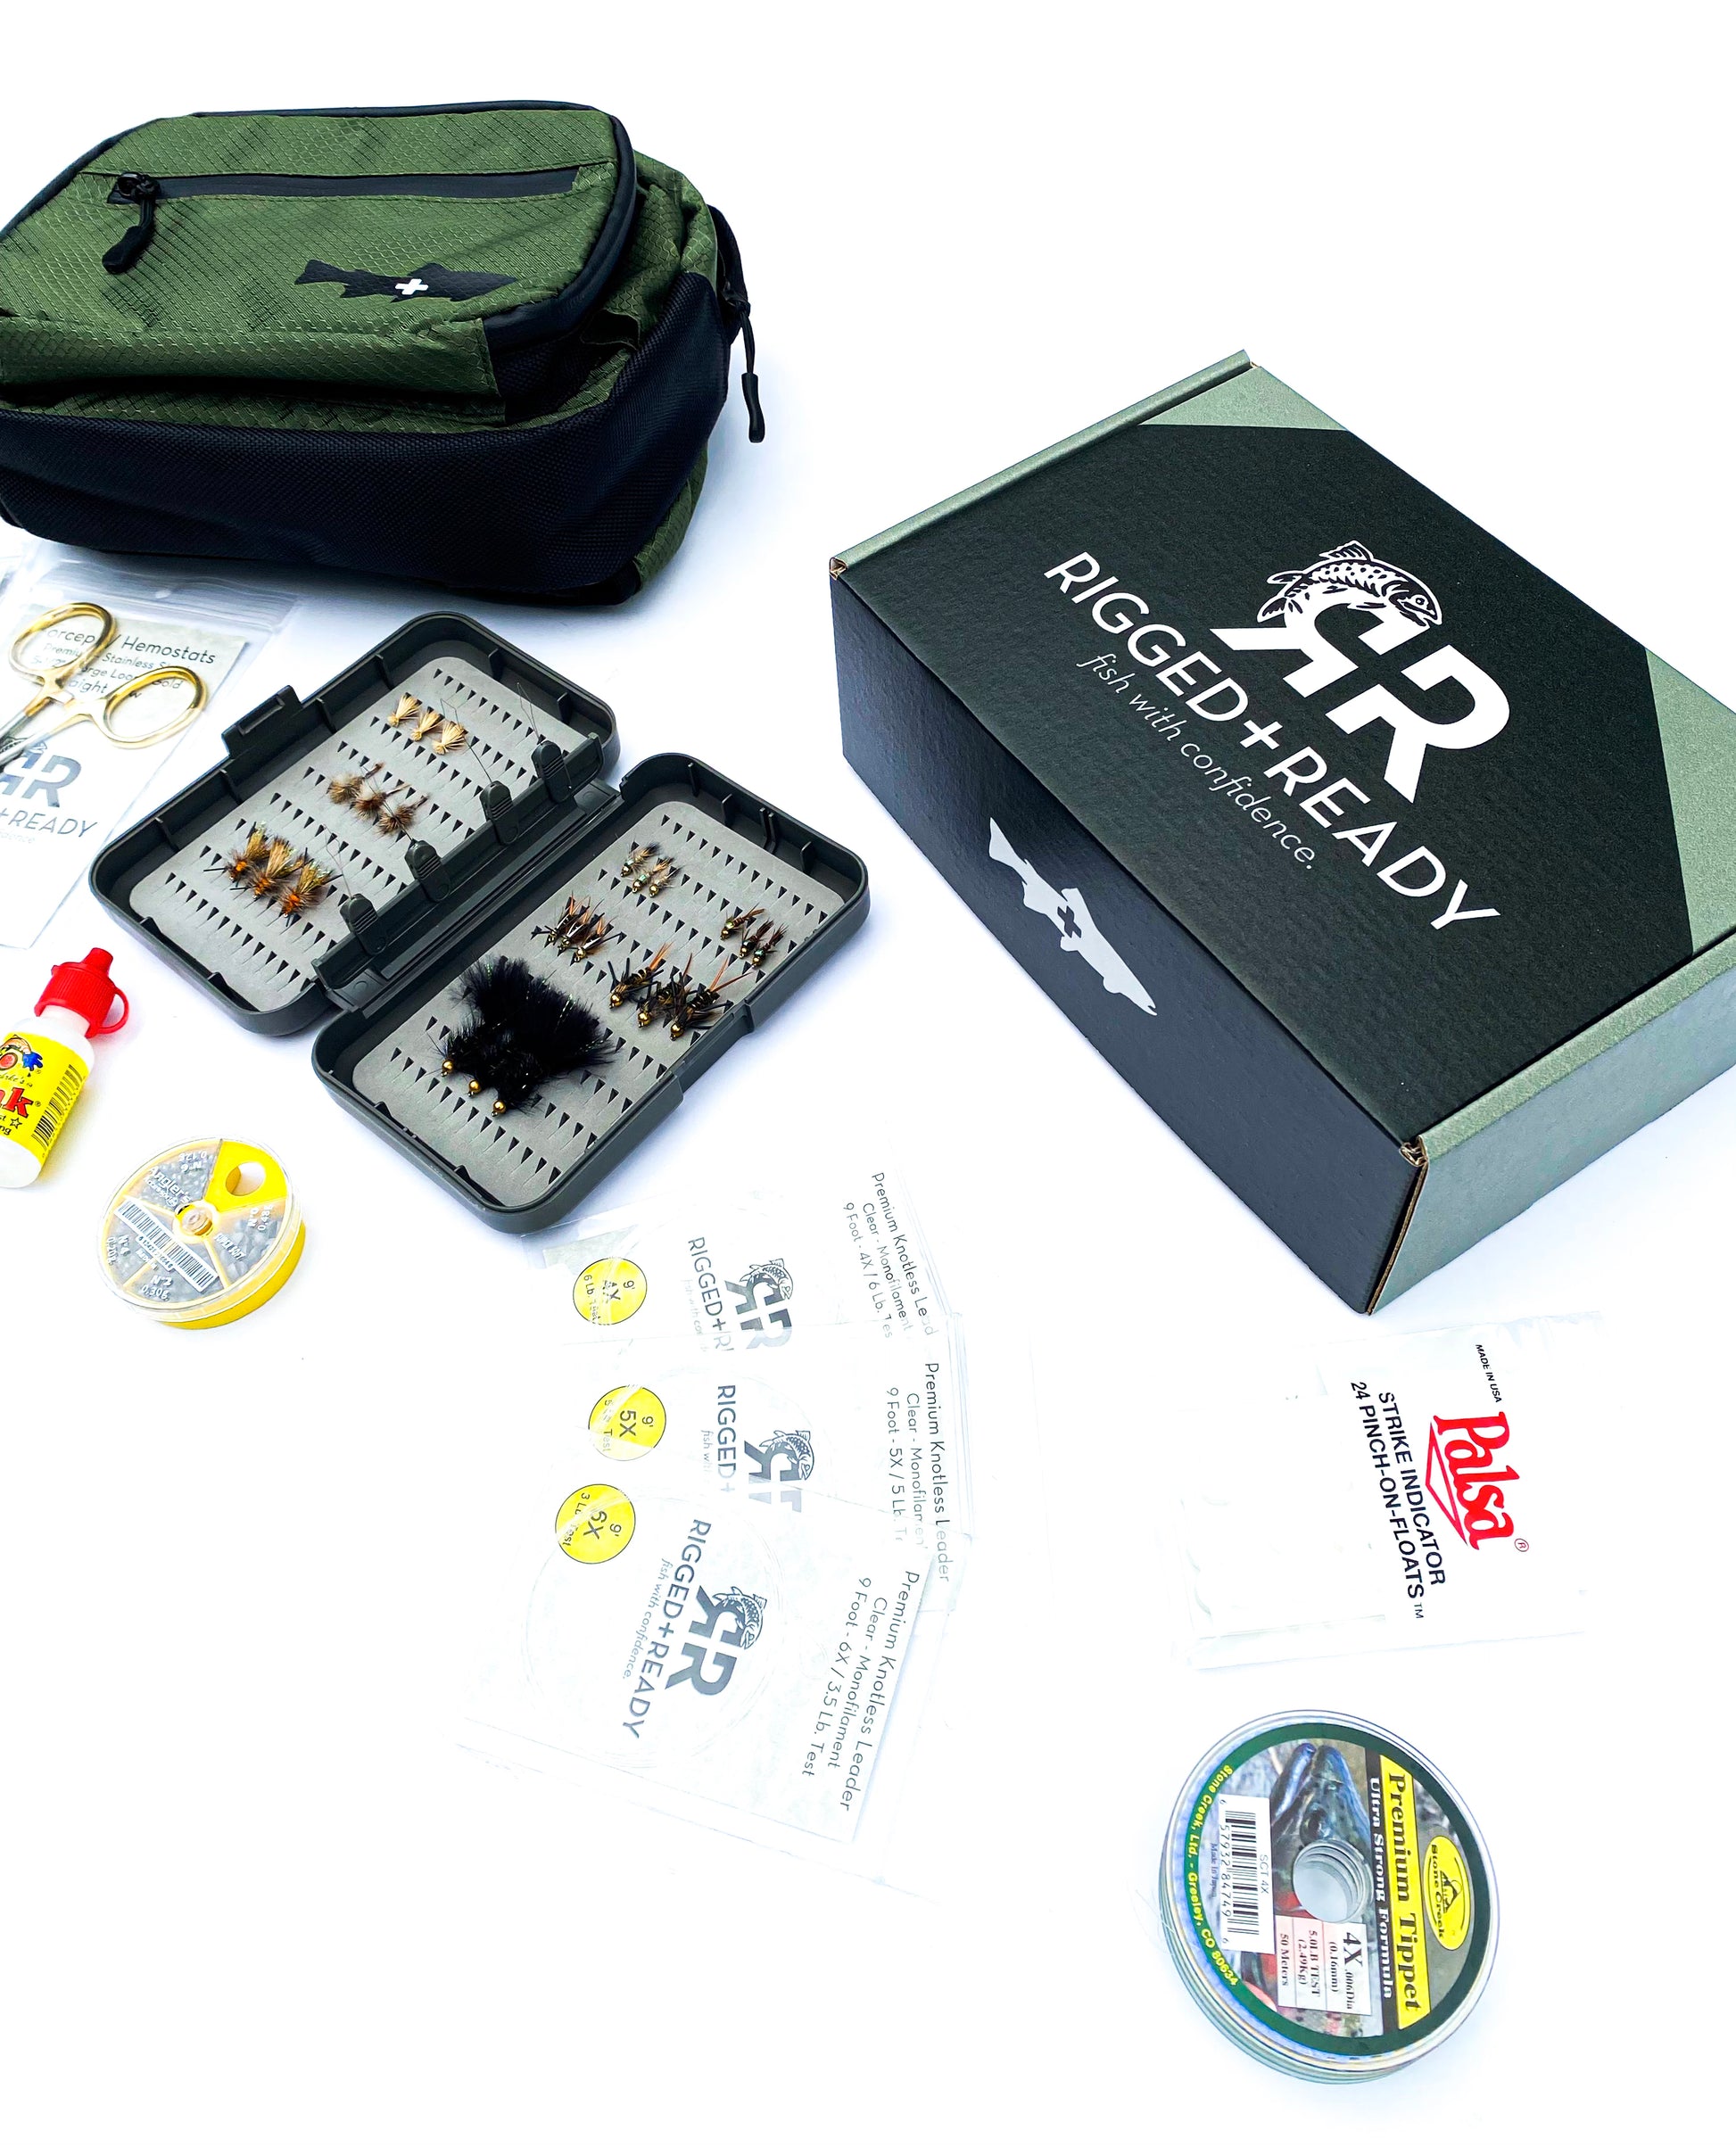 Fly Fishing Starter Kit | The Fully-Loaded Fly Fishing Pack